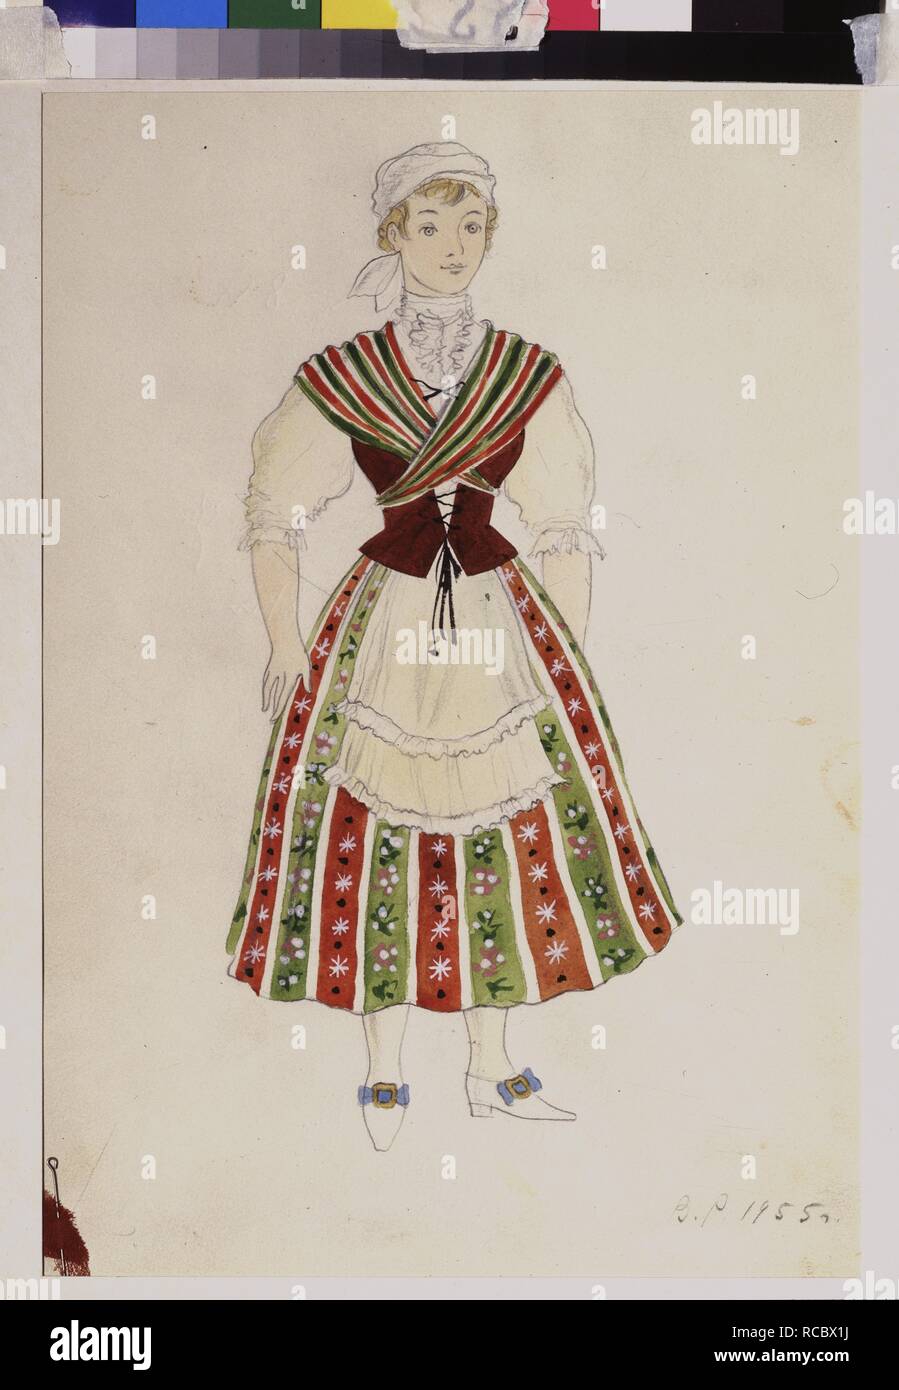 Costume design for the opera The Marriage of Figaro by W.A. Mozart. Museum:  Bolshoi Theatre Museum, Moscow. Author: Ryndin, Vadim Fyodorovich.  Copyright: This artwork is not in public domain. It is your